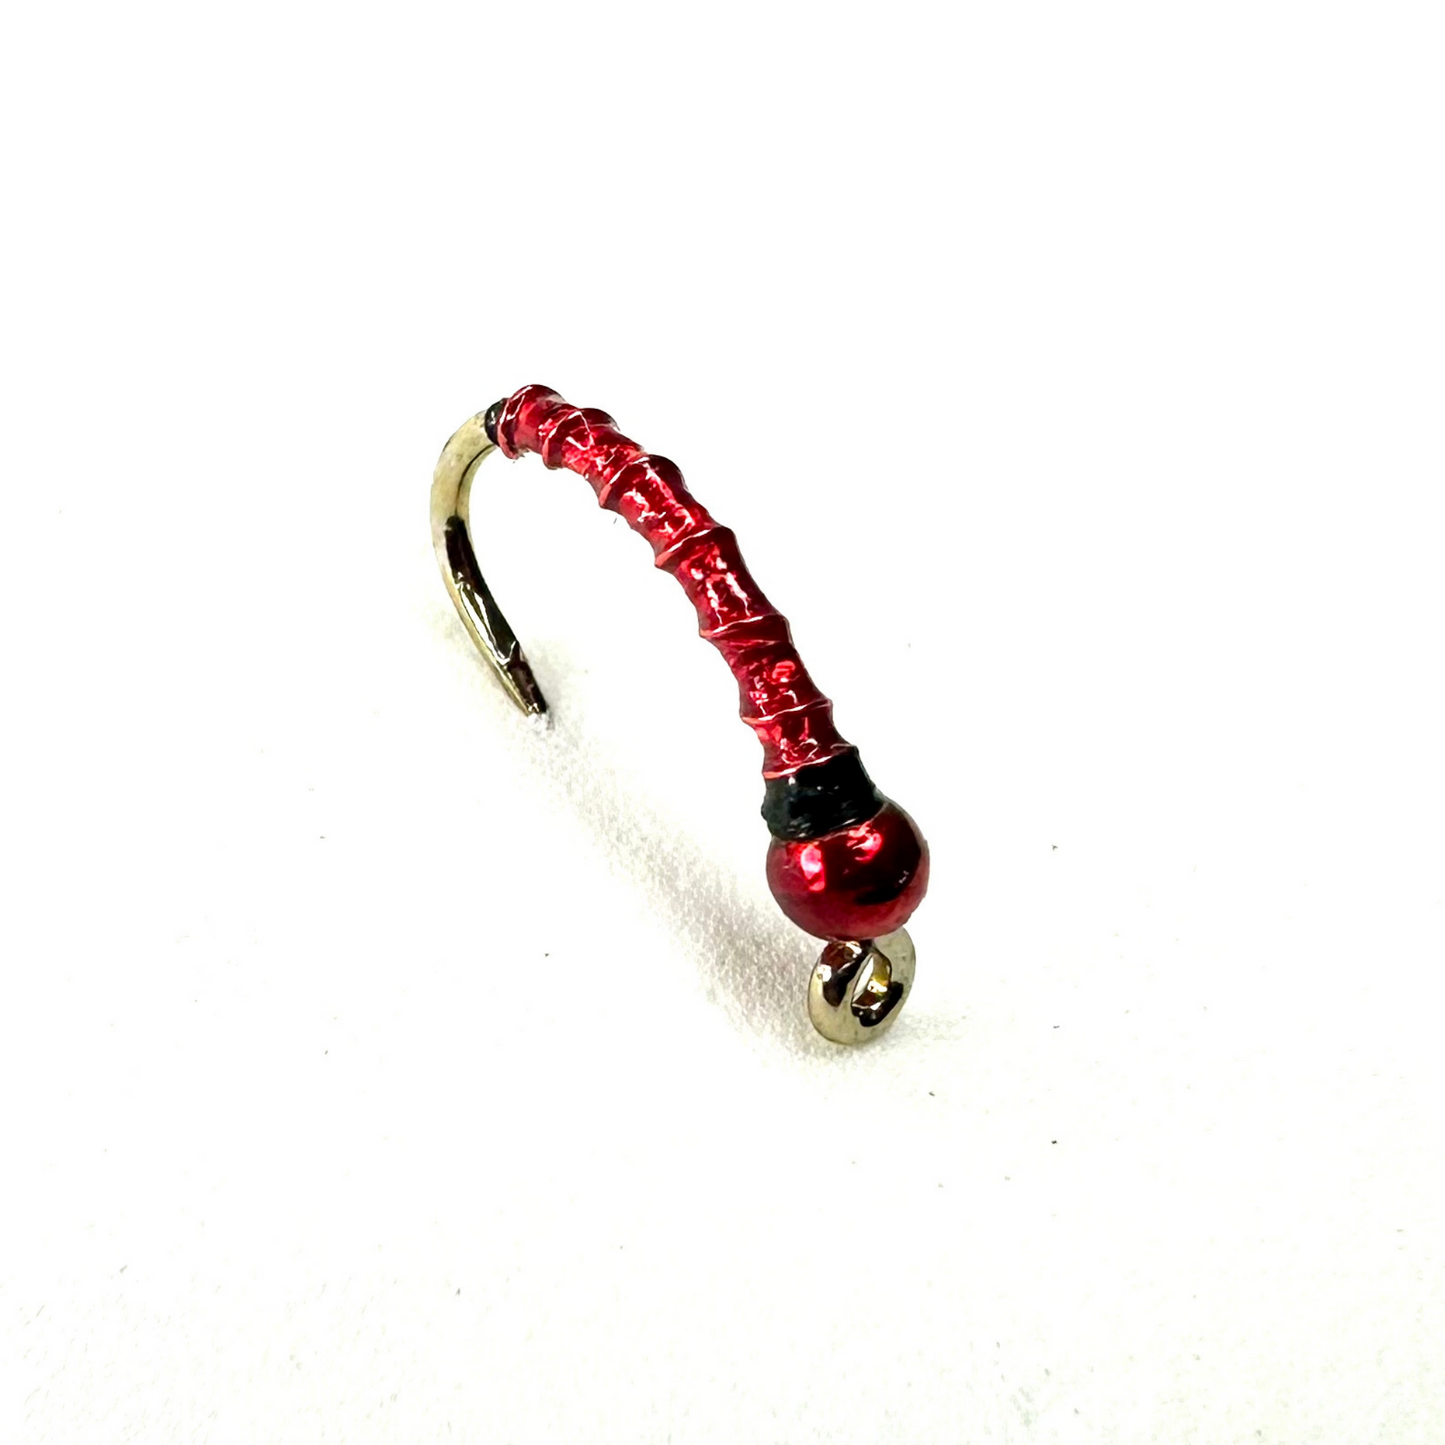 Holographic Bloodworm